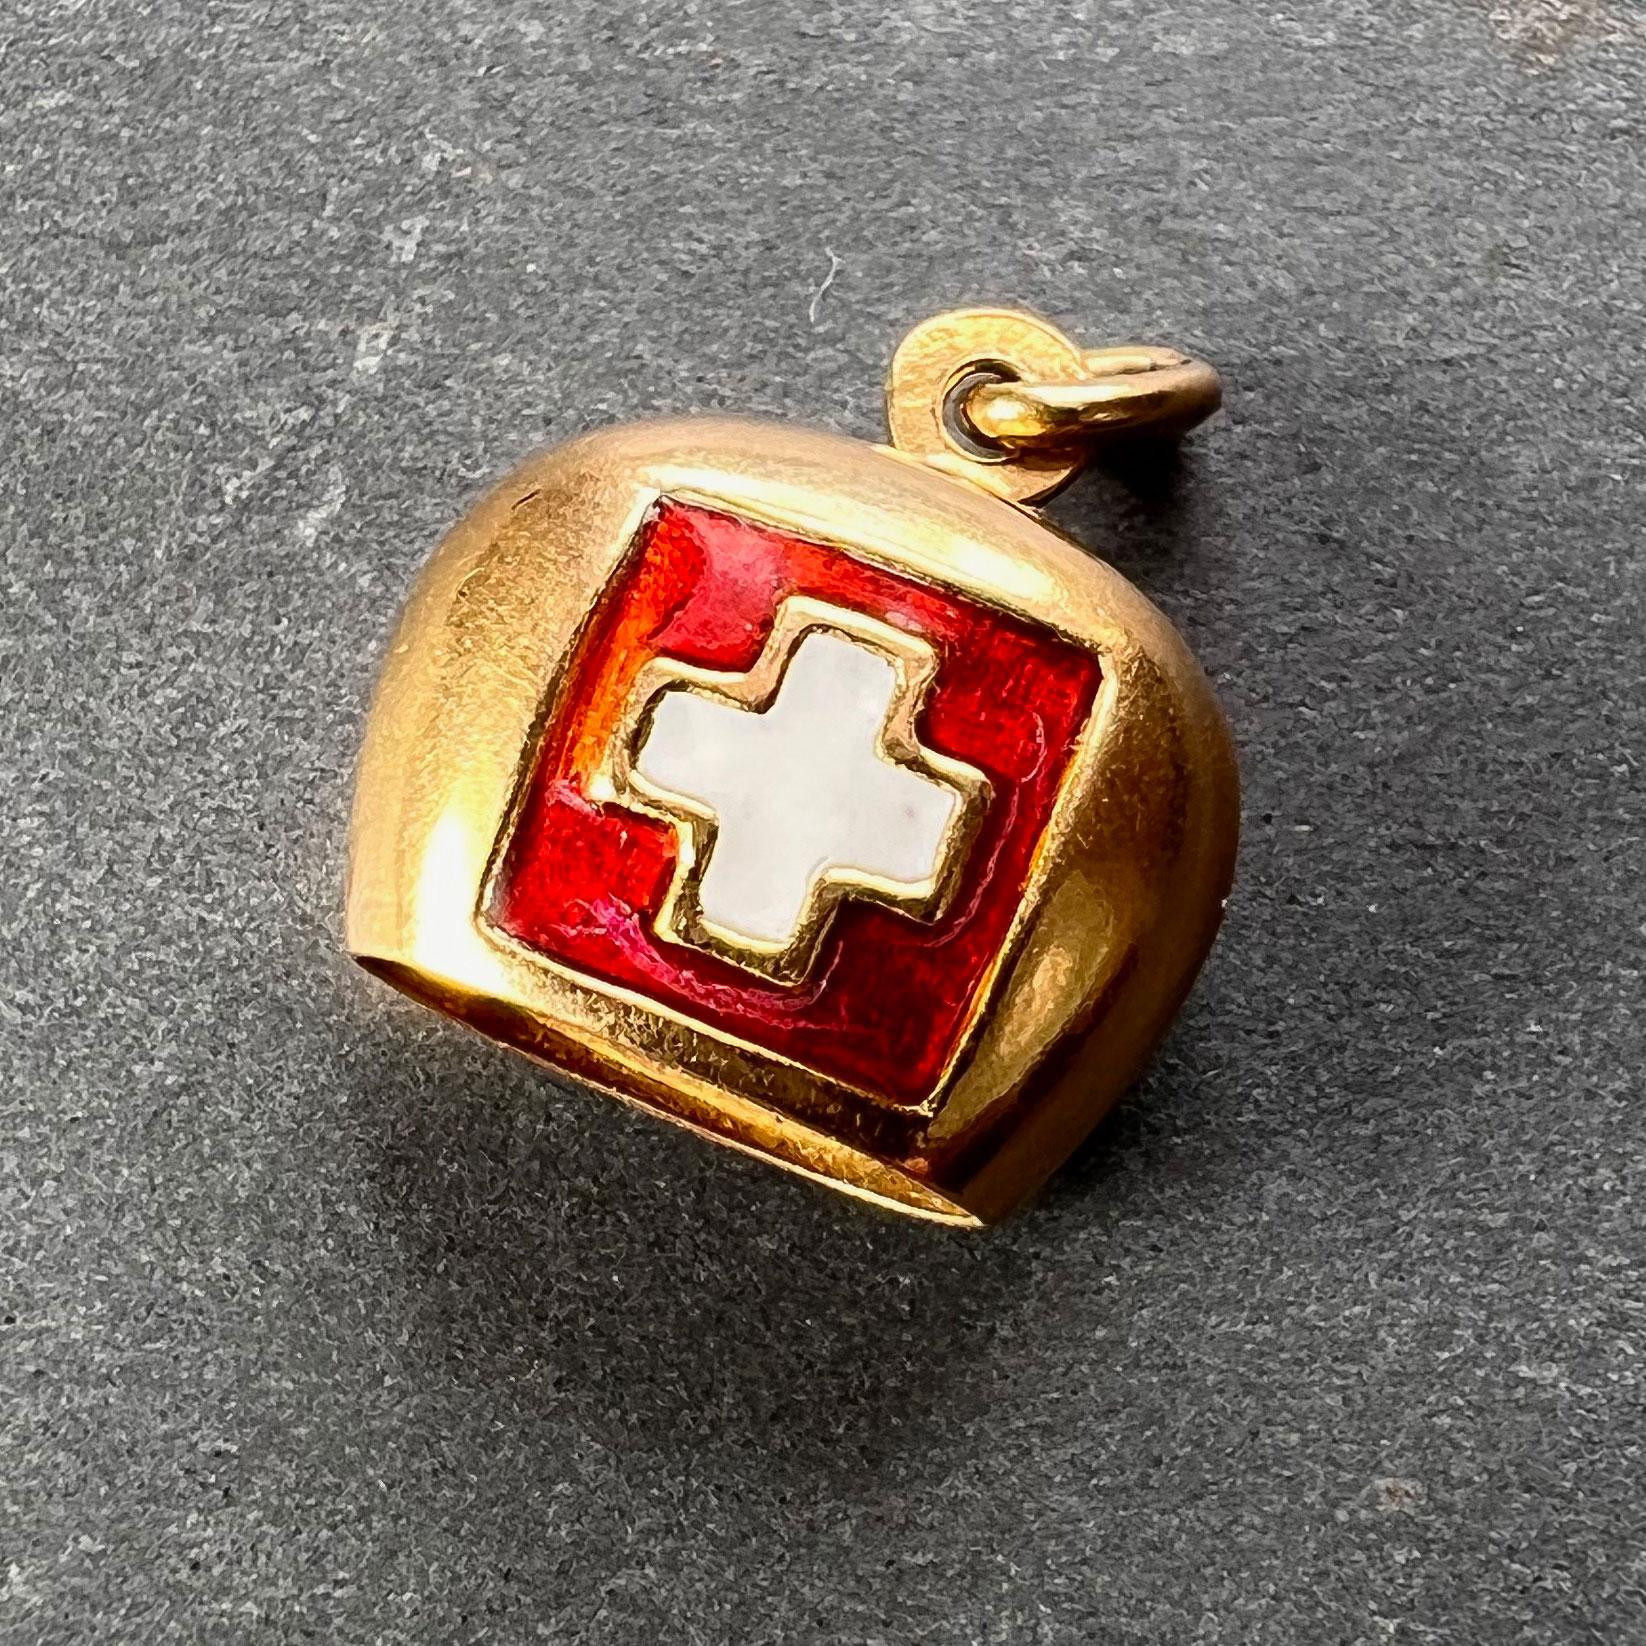 An 18 karat (18K) yellow gold charm pendant designed as a bell with enamel Swiss flag. Clapper missing. Stamped with the Swiss mark for 18 karat gold. Some chips to the enamel.

Dimensions: 1.4 x 1.4 x 0.75 cm (not including jump ring)
Weight: 1.86